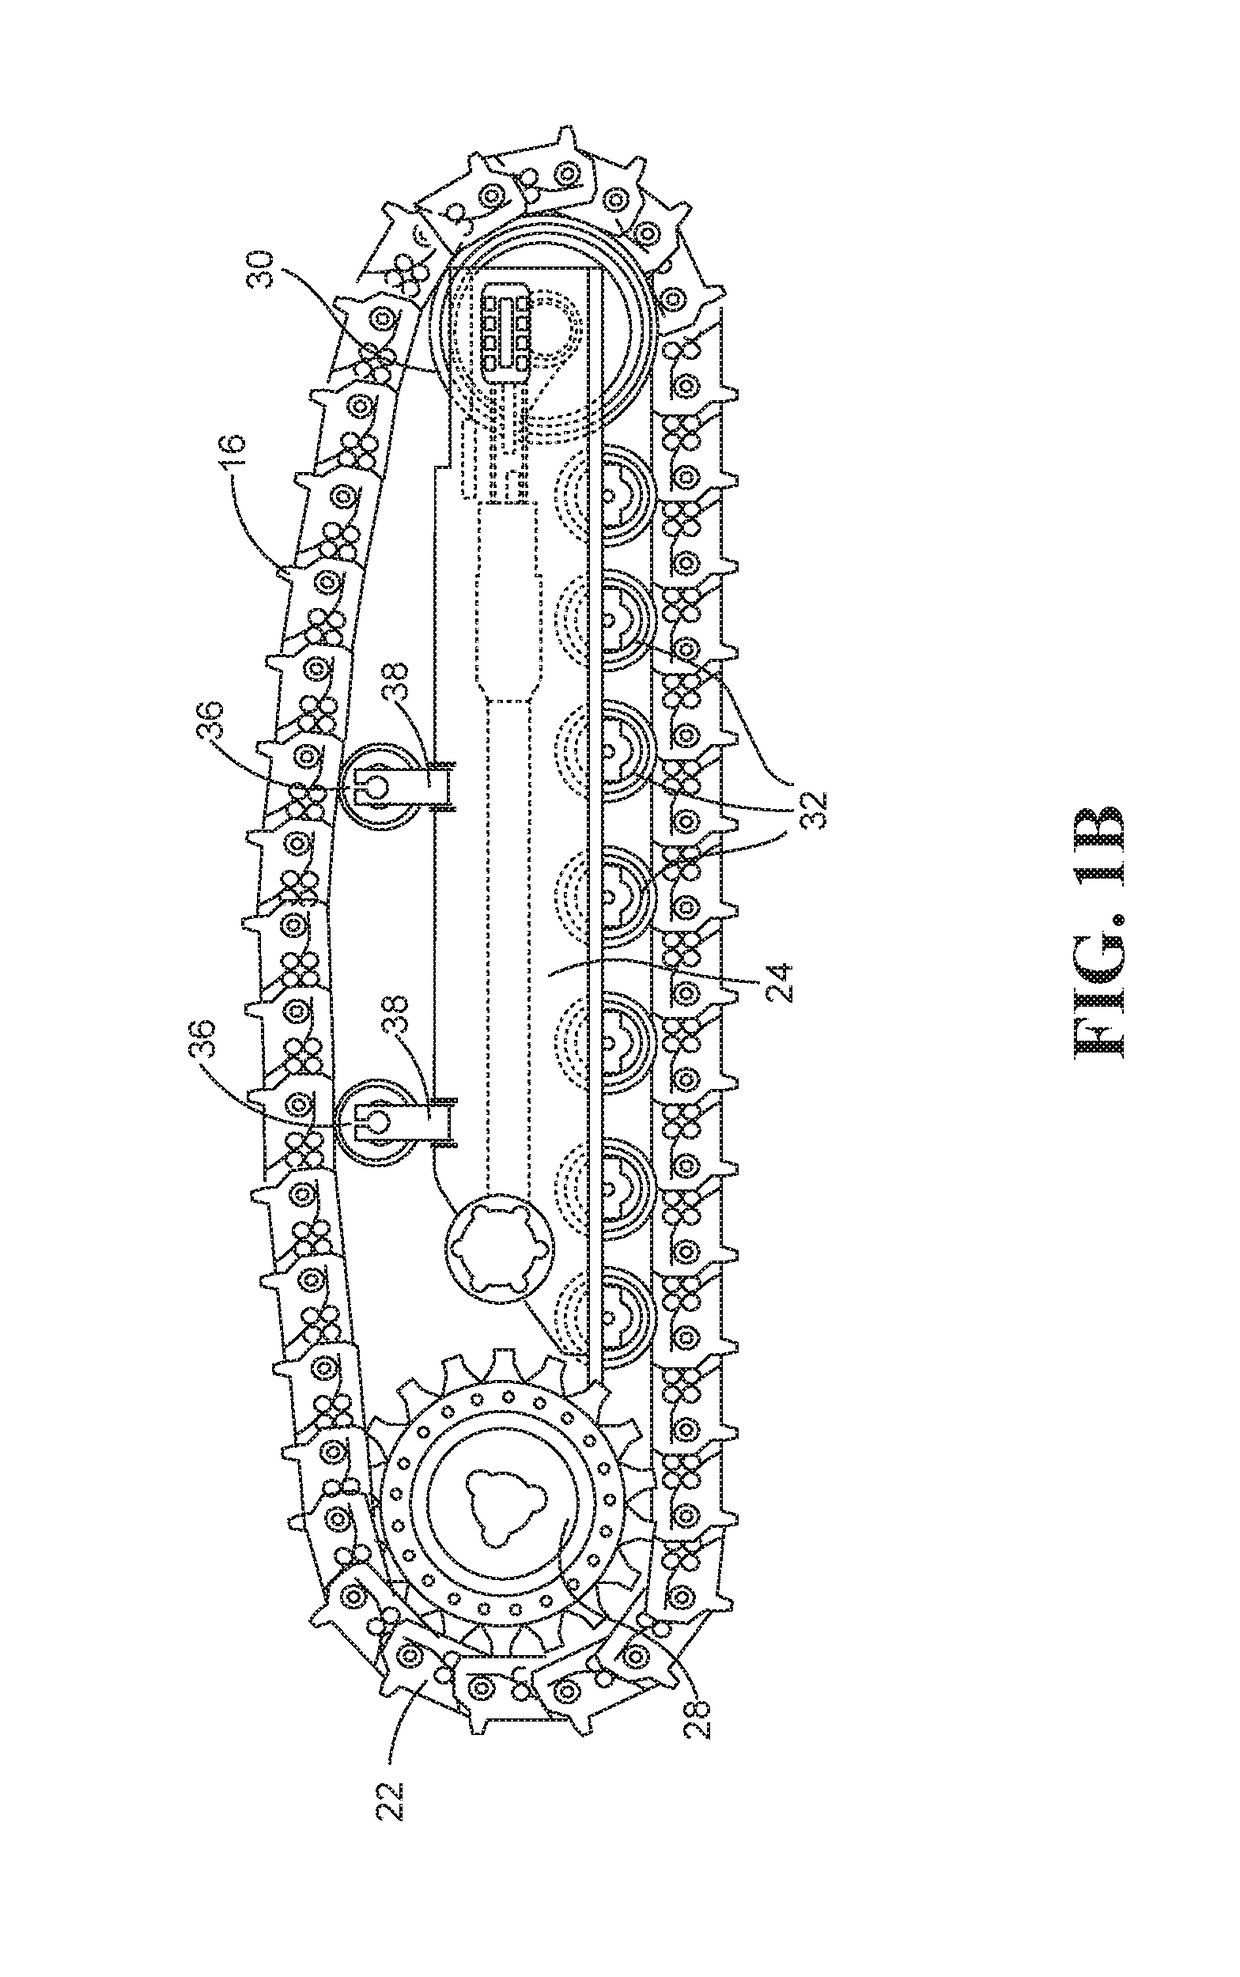 Track roller assembly and method